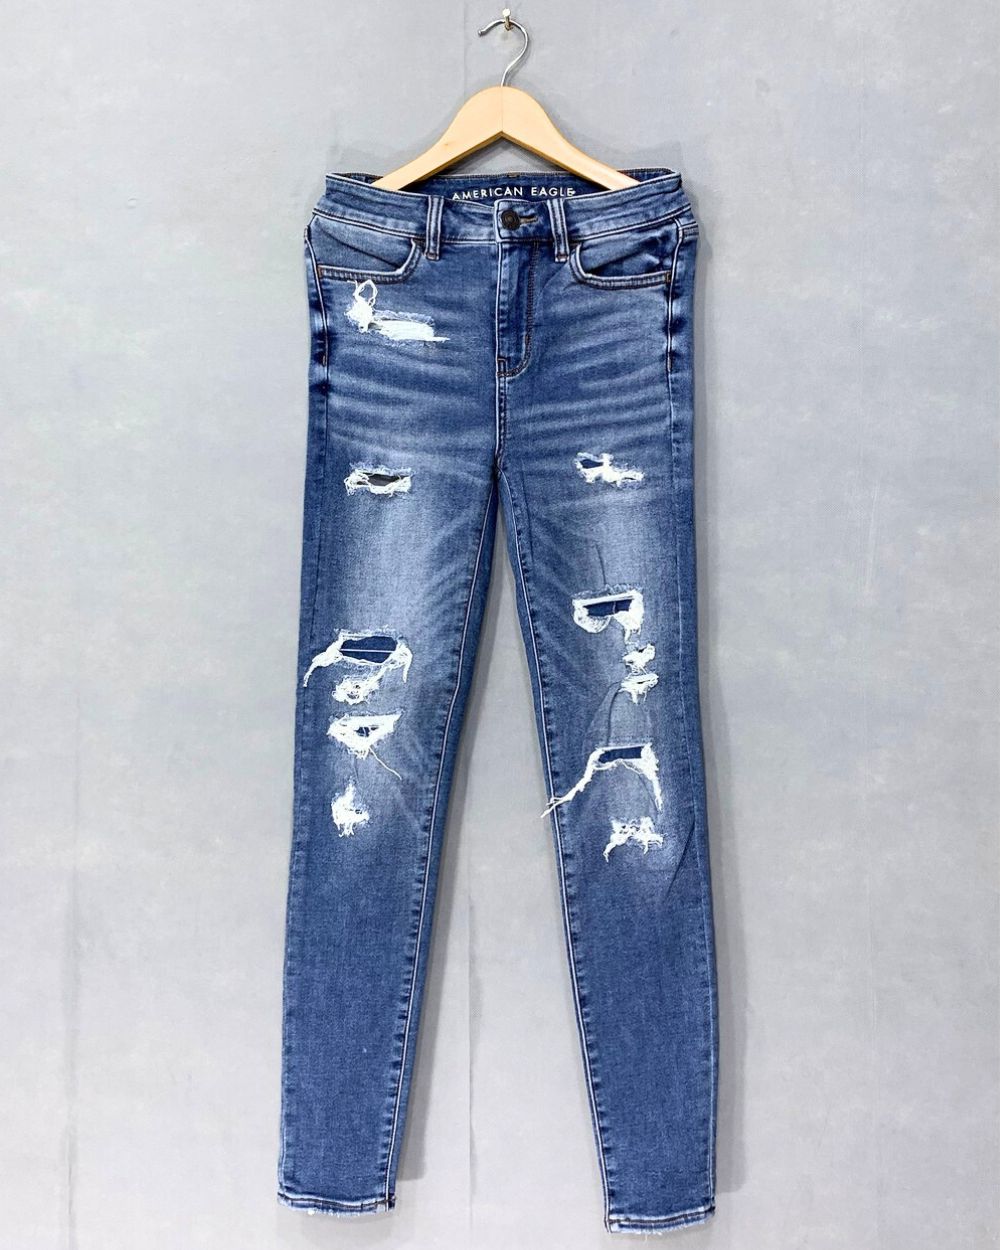 American Eagle Branded Original Jeans For Women Pant